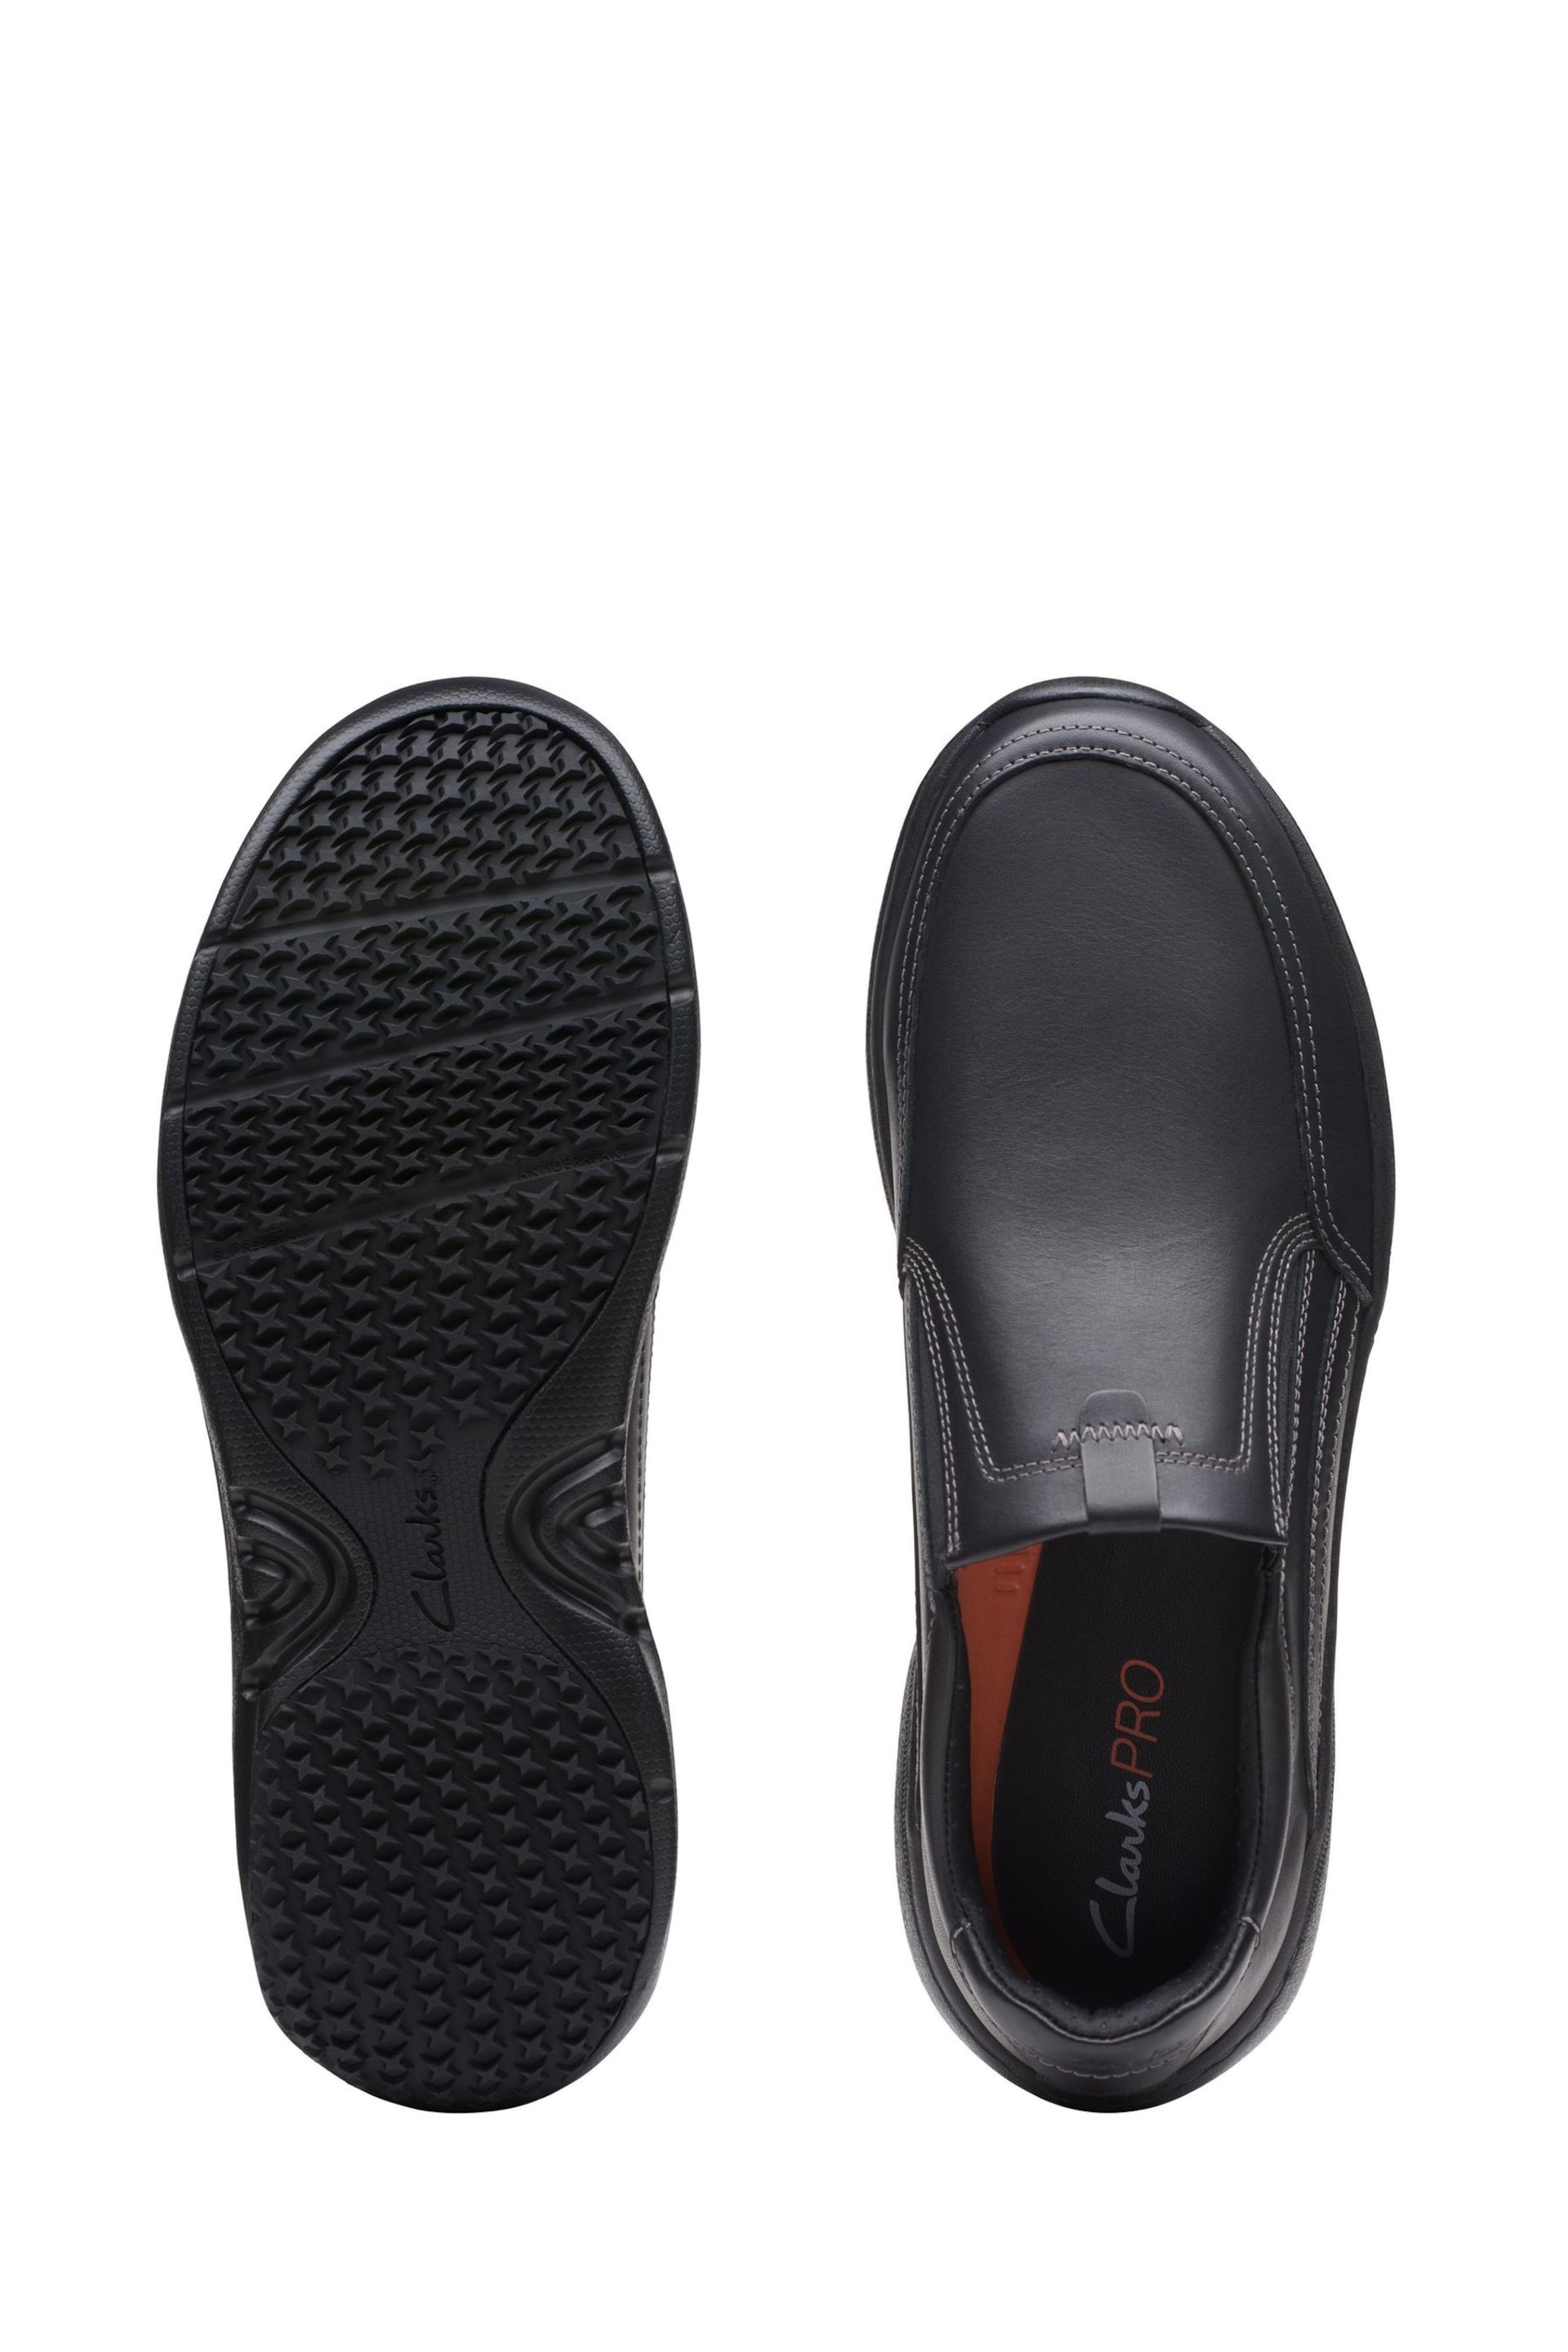 Clarks Black Leather ClarksPro Step Shoes - Image 7 of 7